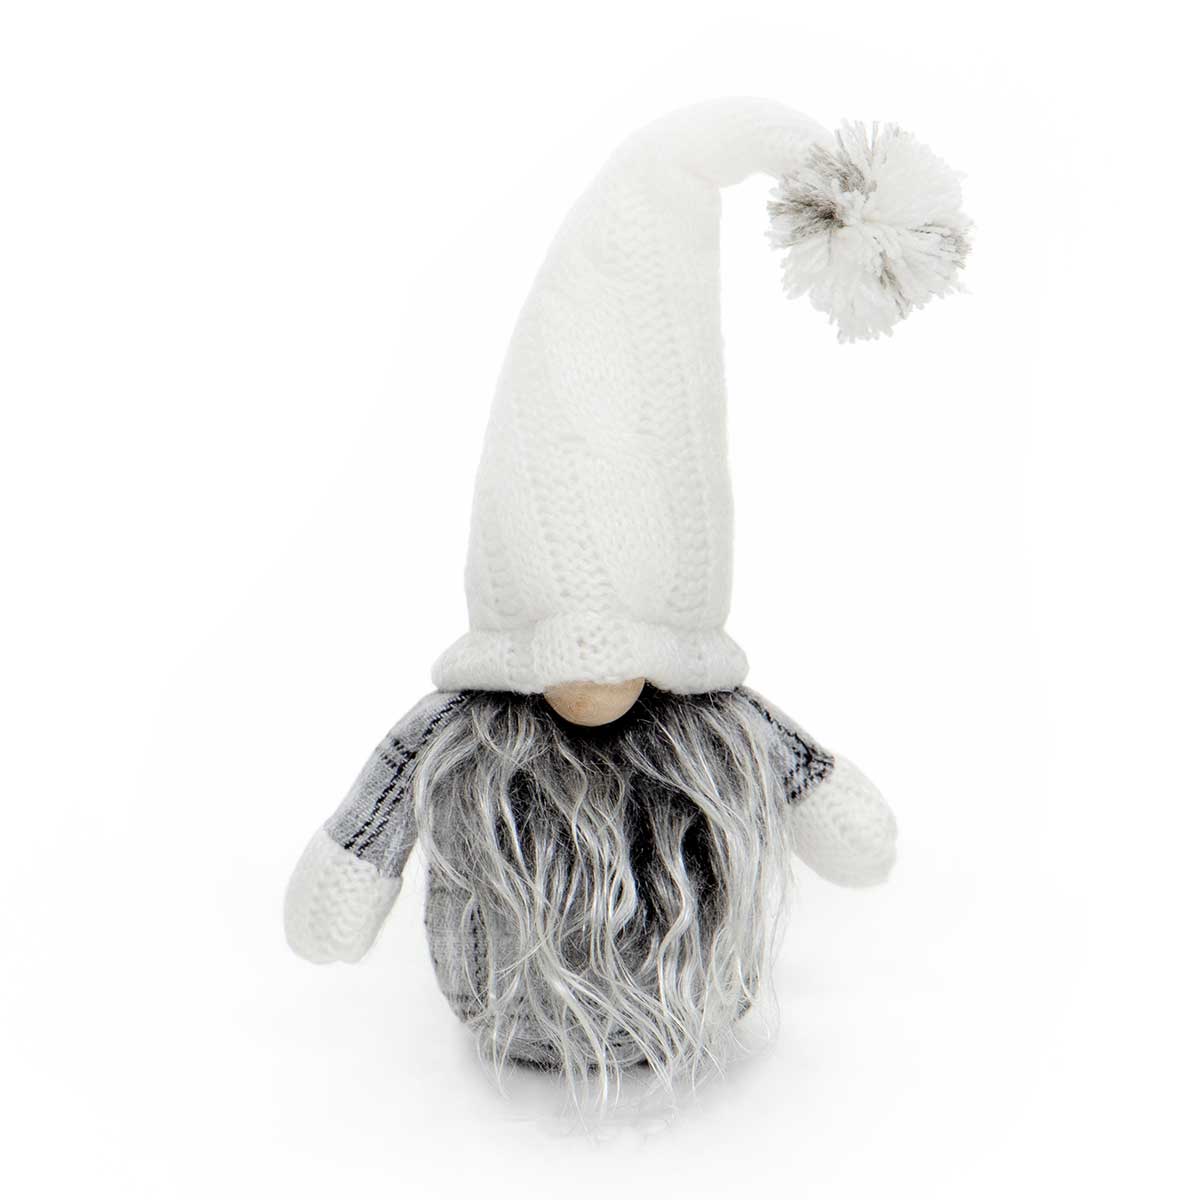 !POM-POM GNOME GREY/CREAM WITH WIRED CABLE KNIT SWEATER